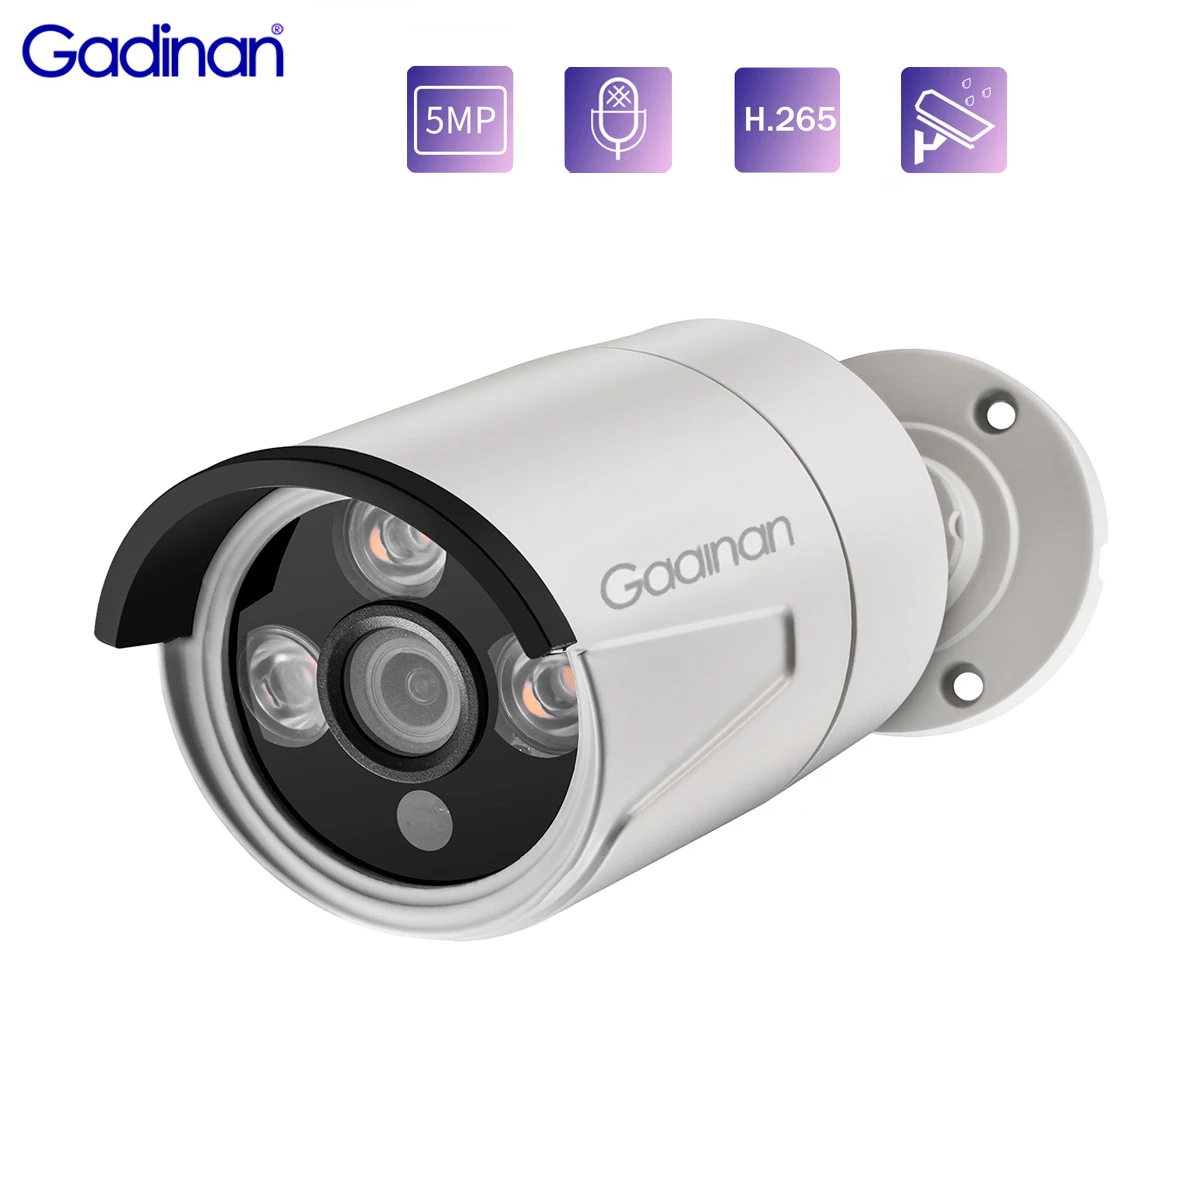 

Gadinan 5MP H.265+ Bullet IP Camera SONY IMX335 Infrared Audio Outdoor IP66 Security Surveillance Metal Face detection POE/DC